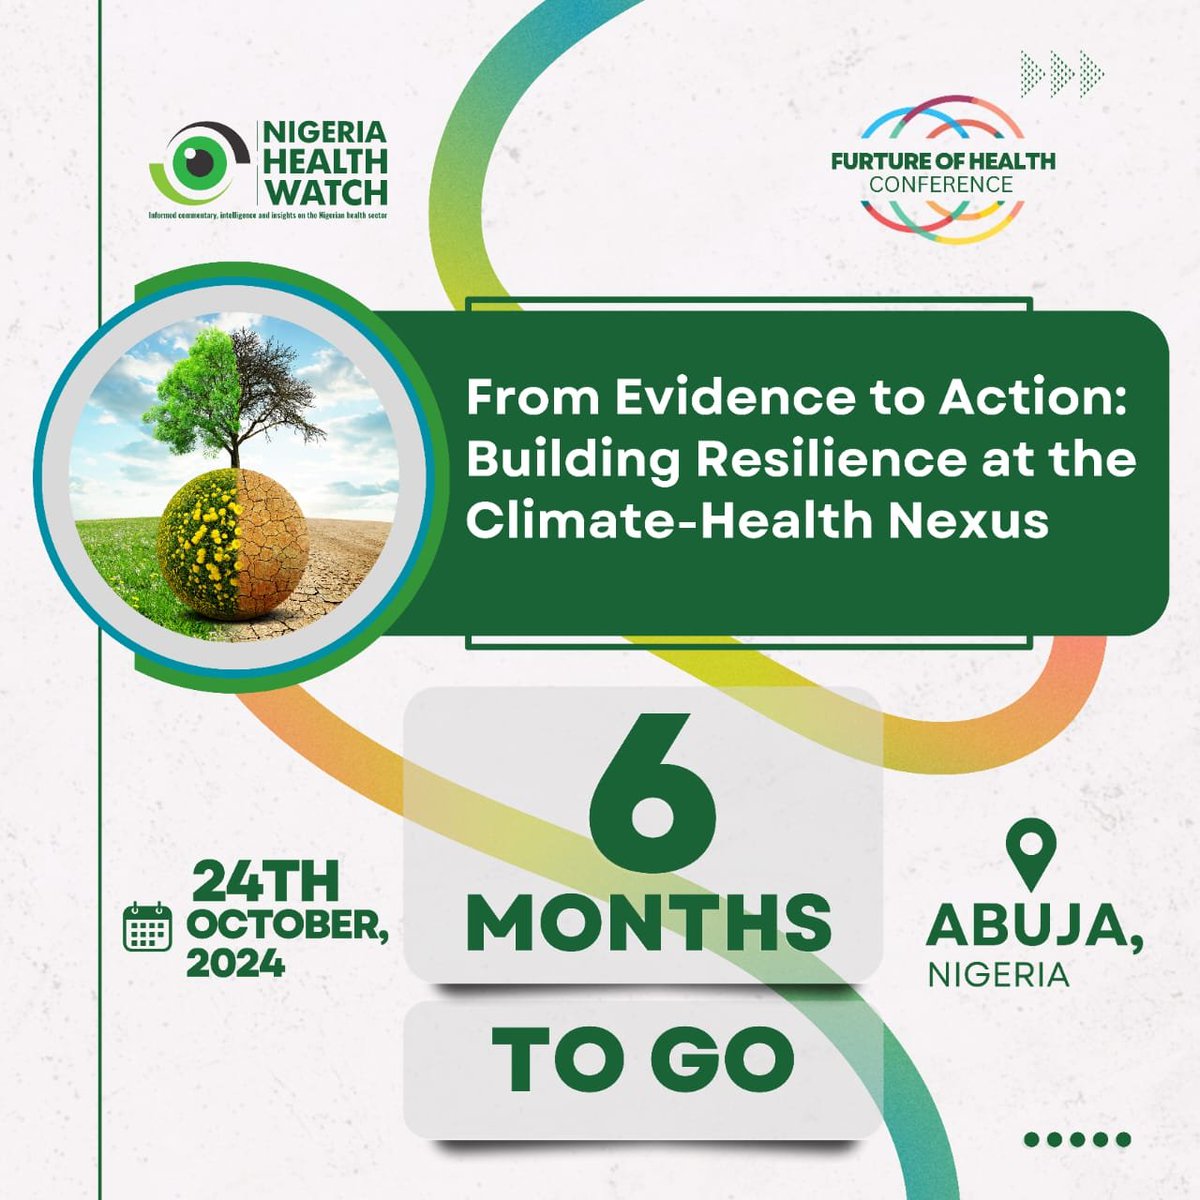 The countdown to our Future of Health Conference 2024 begins today! The health impact of climate change will be at the heart of this year's event, themed 'From Evidence to Action: Building Resilience at the Climate Health Nexus. Watch this space for more! #ClimateHealthNexusNG